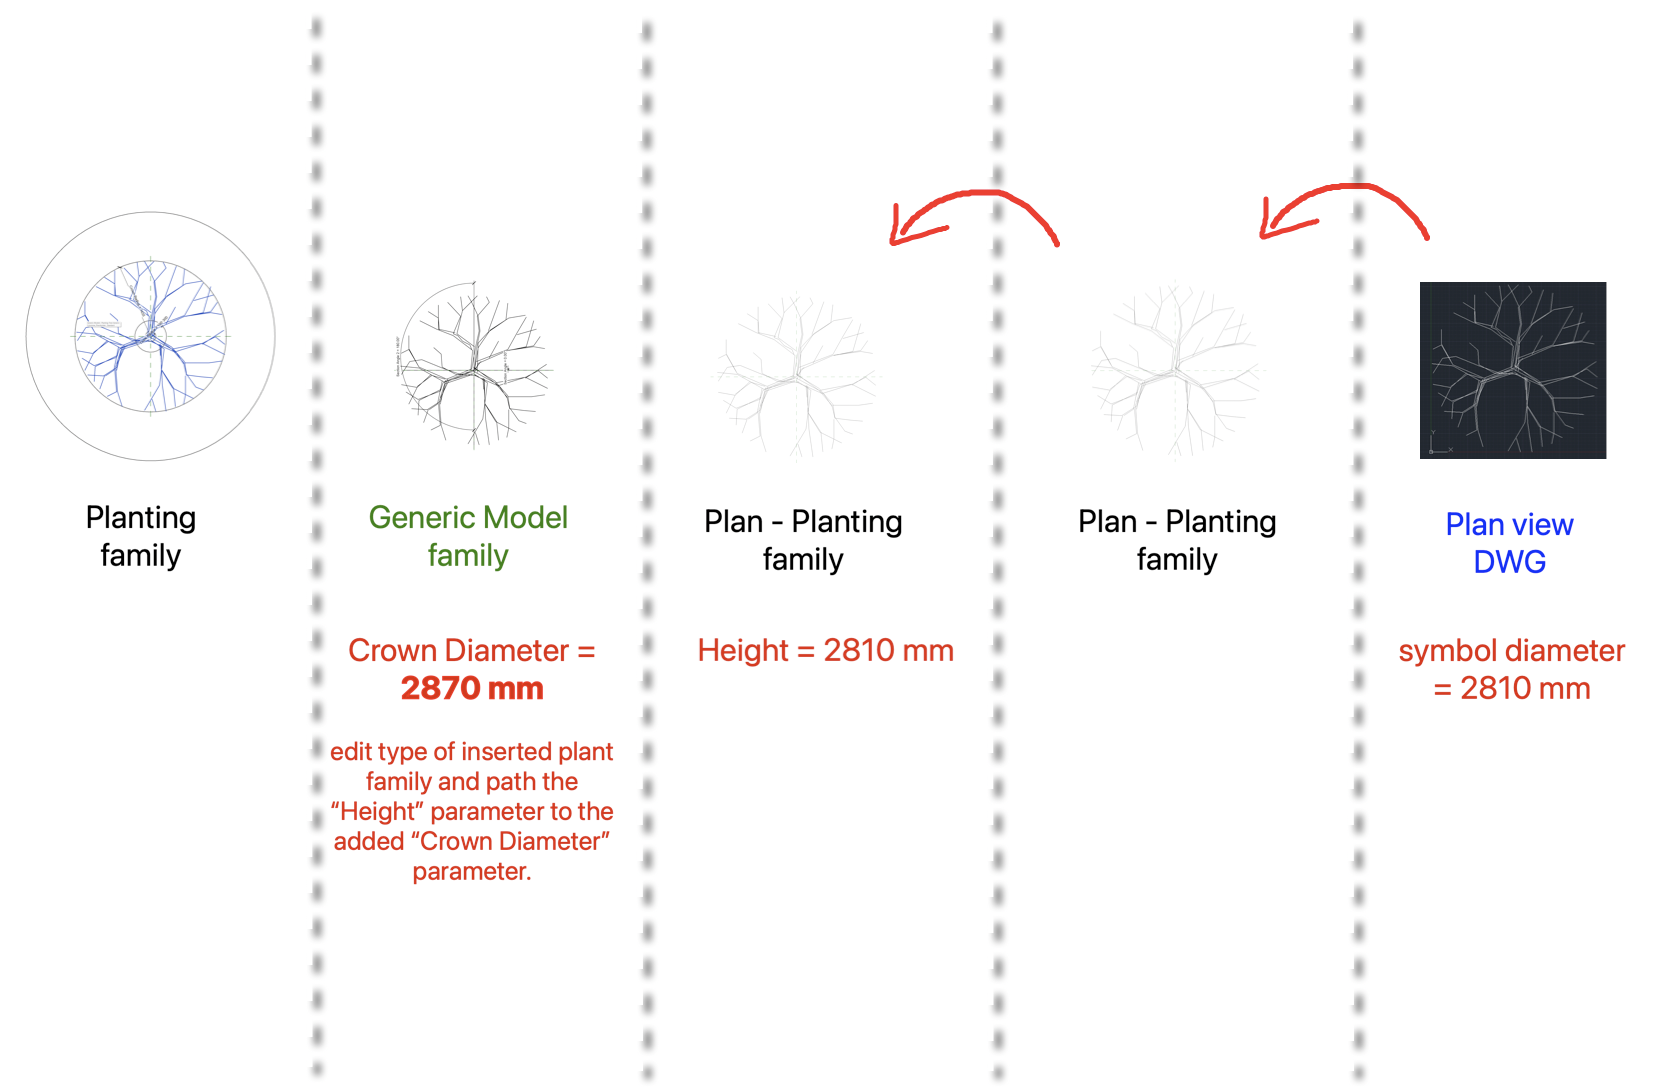 Diagram showing the relationship between an image of a Plan View DWG at 2810mm, Plan - planting family (height at 2810mm), generic model (crown diameter at 2870mm. Edit type of inserted plant family and path the 